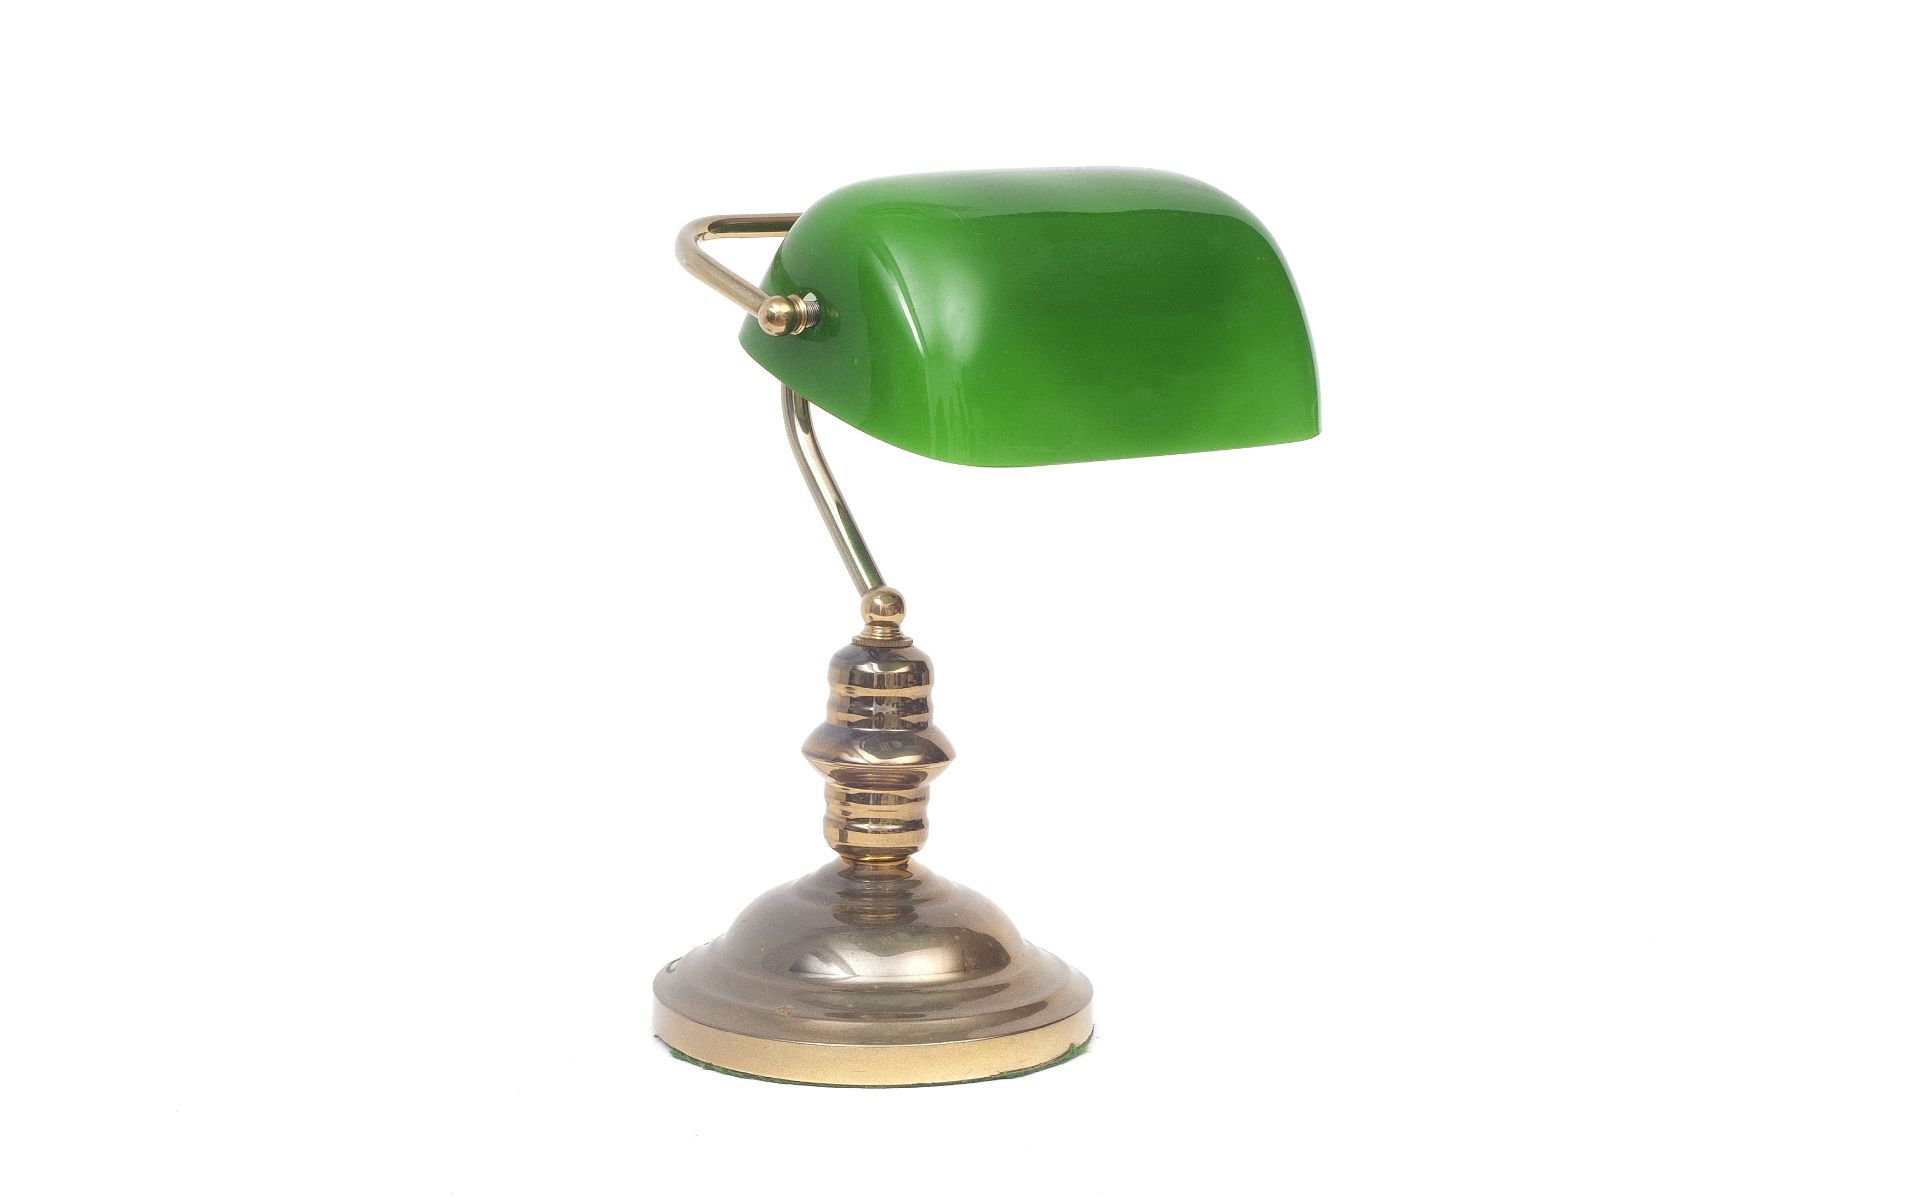 AN ART DECO STYLE BRASS AND GREEN GLASS DESK LAMP